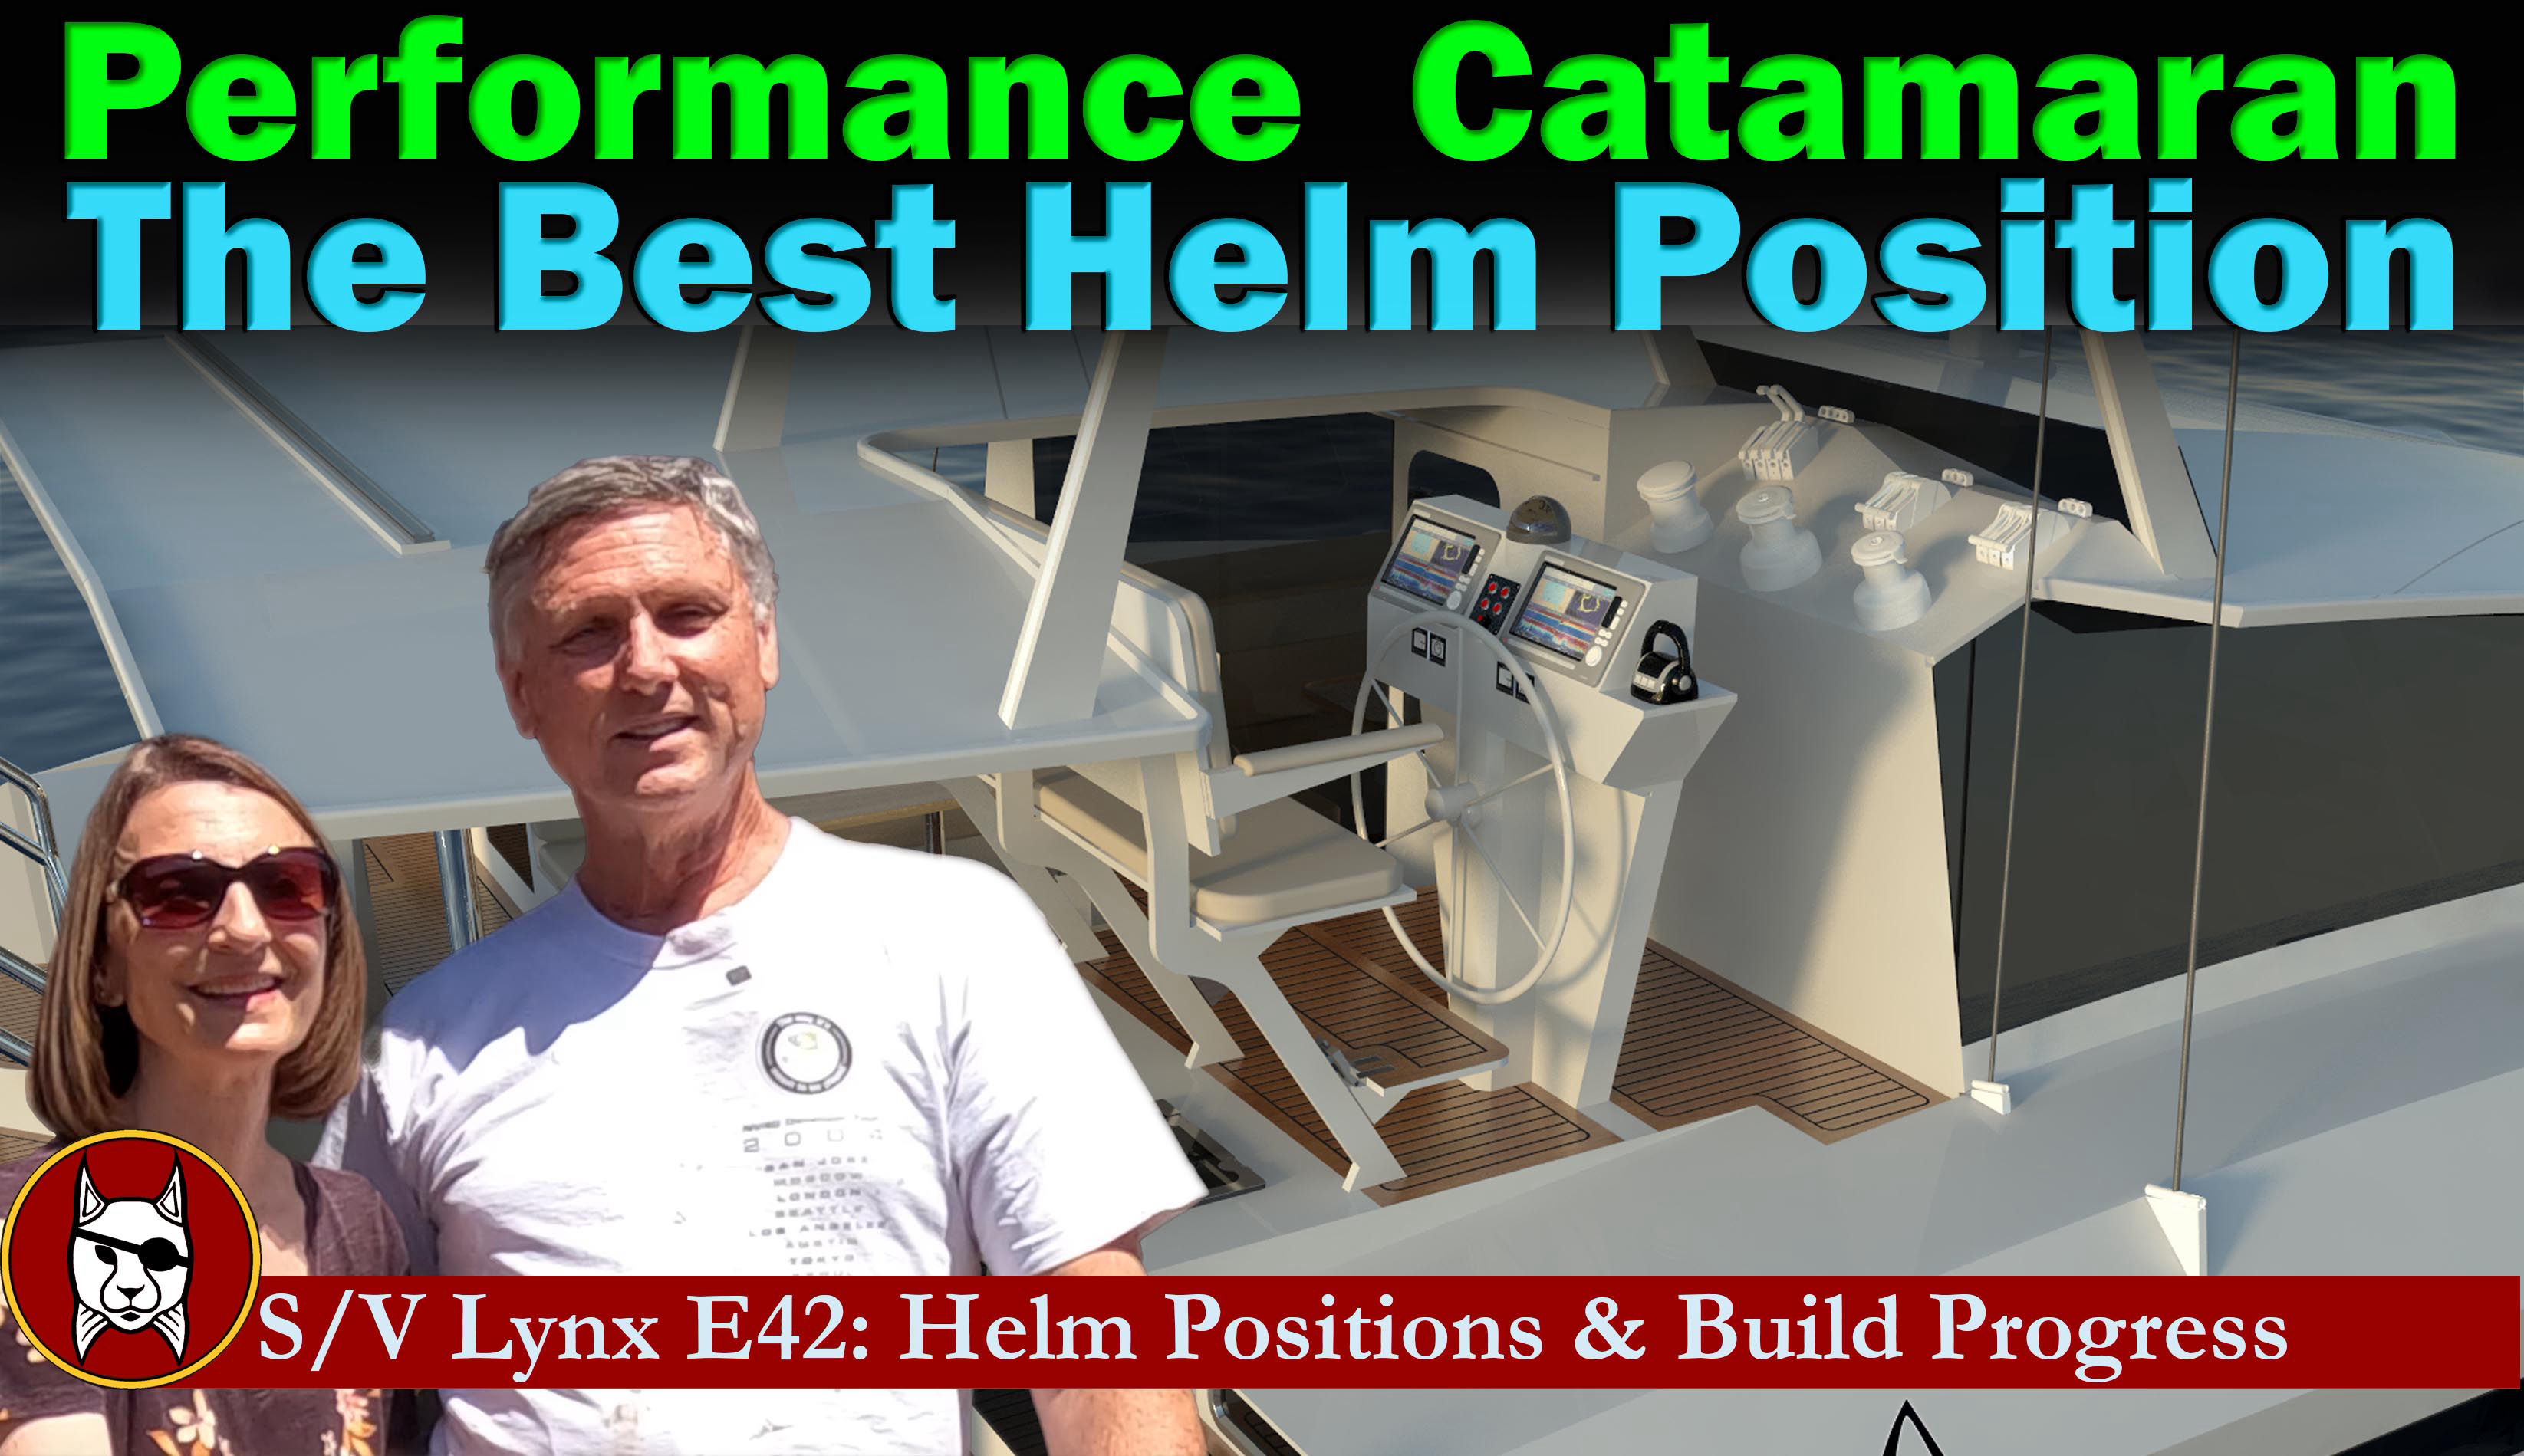 The Best Helm Position and Build Progress